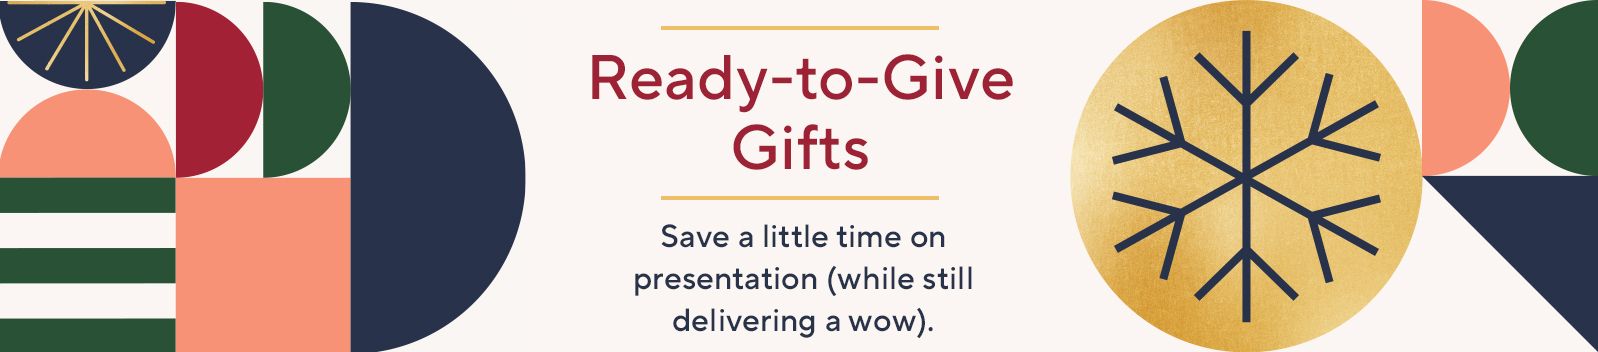 Ready-to-Give Gifts: Save a little time on presentation (while still delivering a wow). 